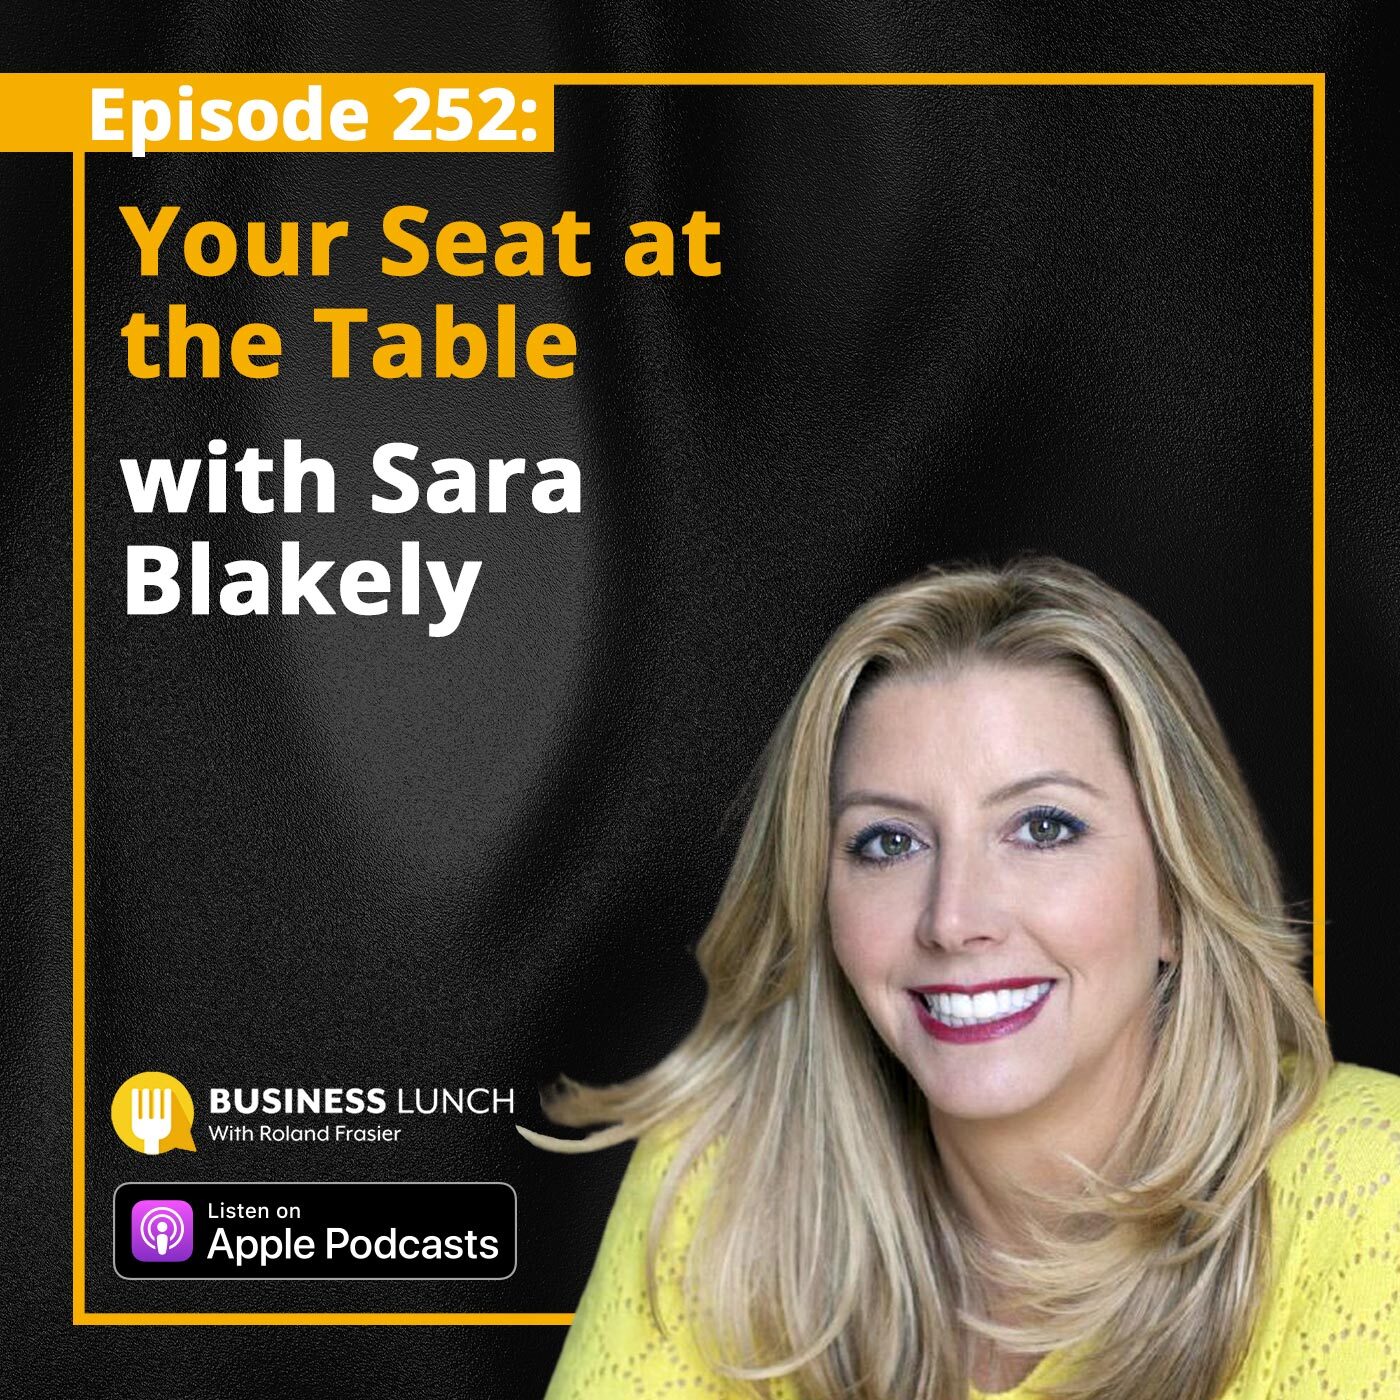 Sara Blakely - Spanx Founder's Tips for Success